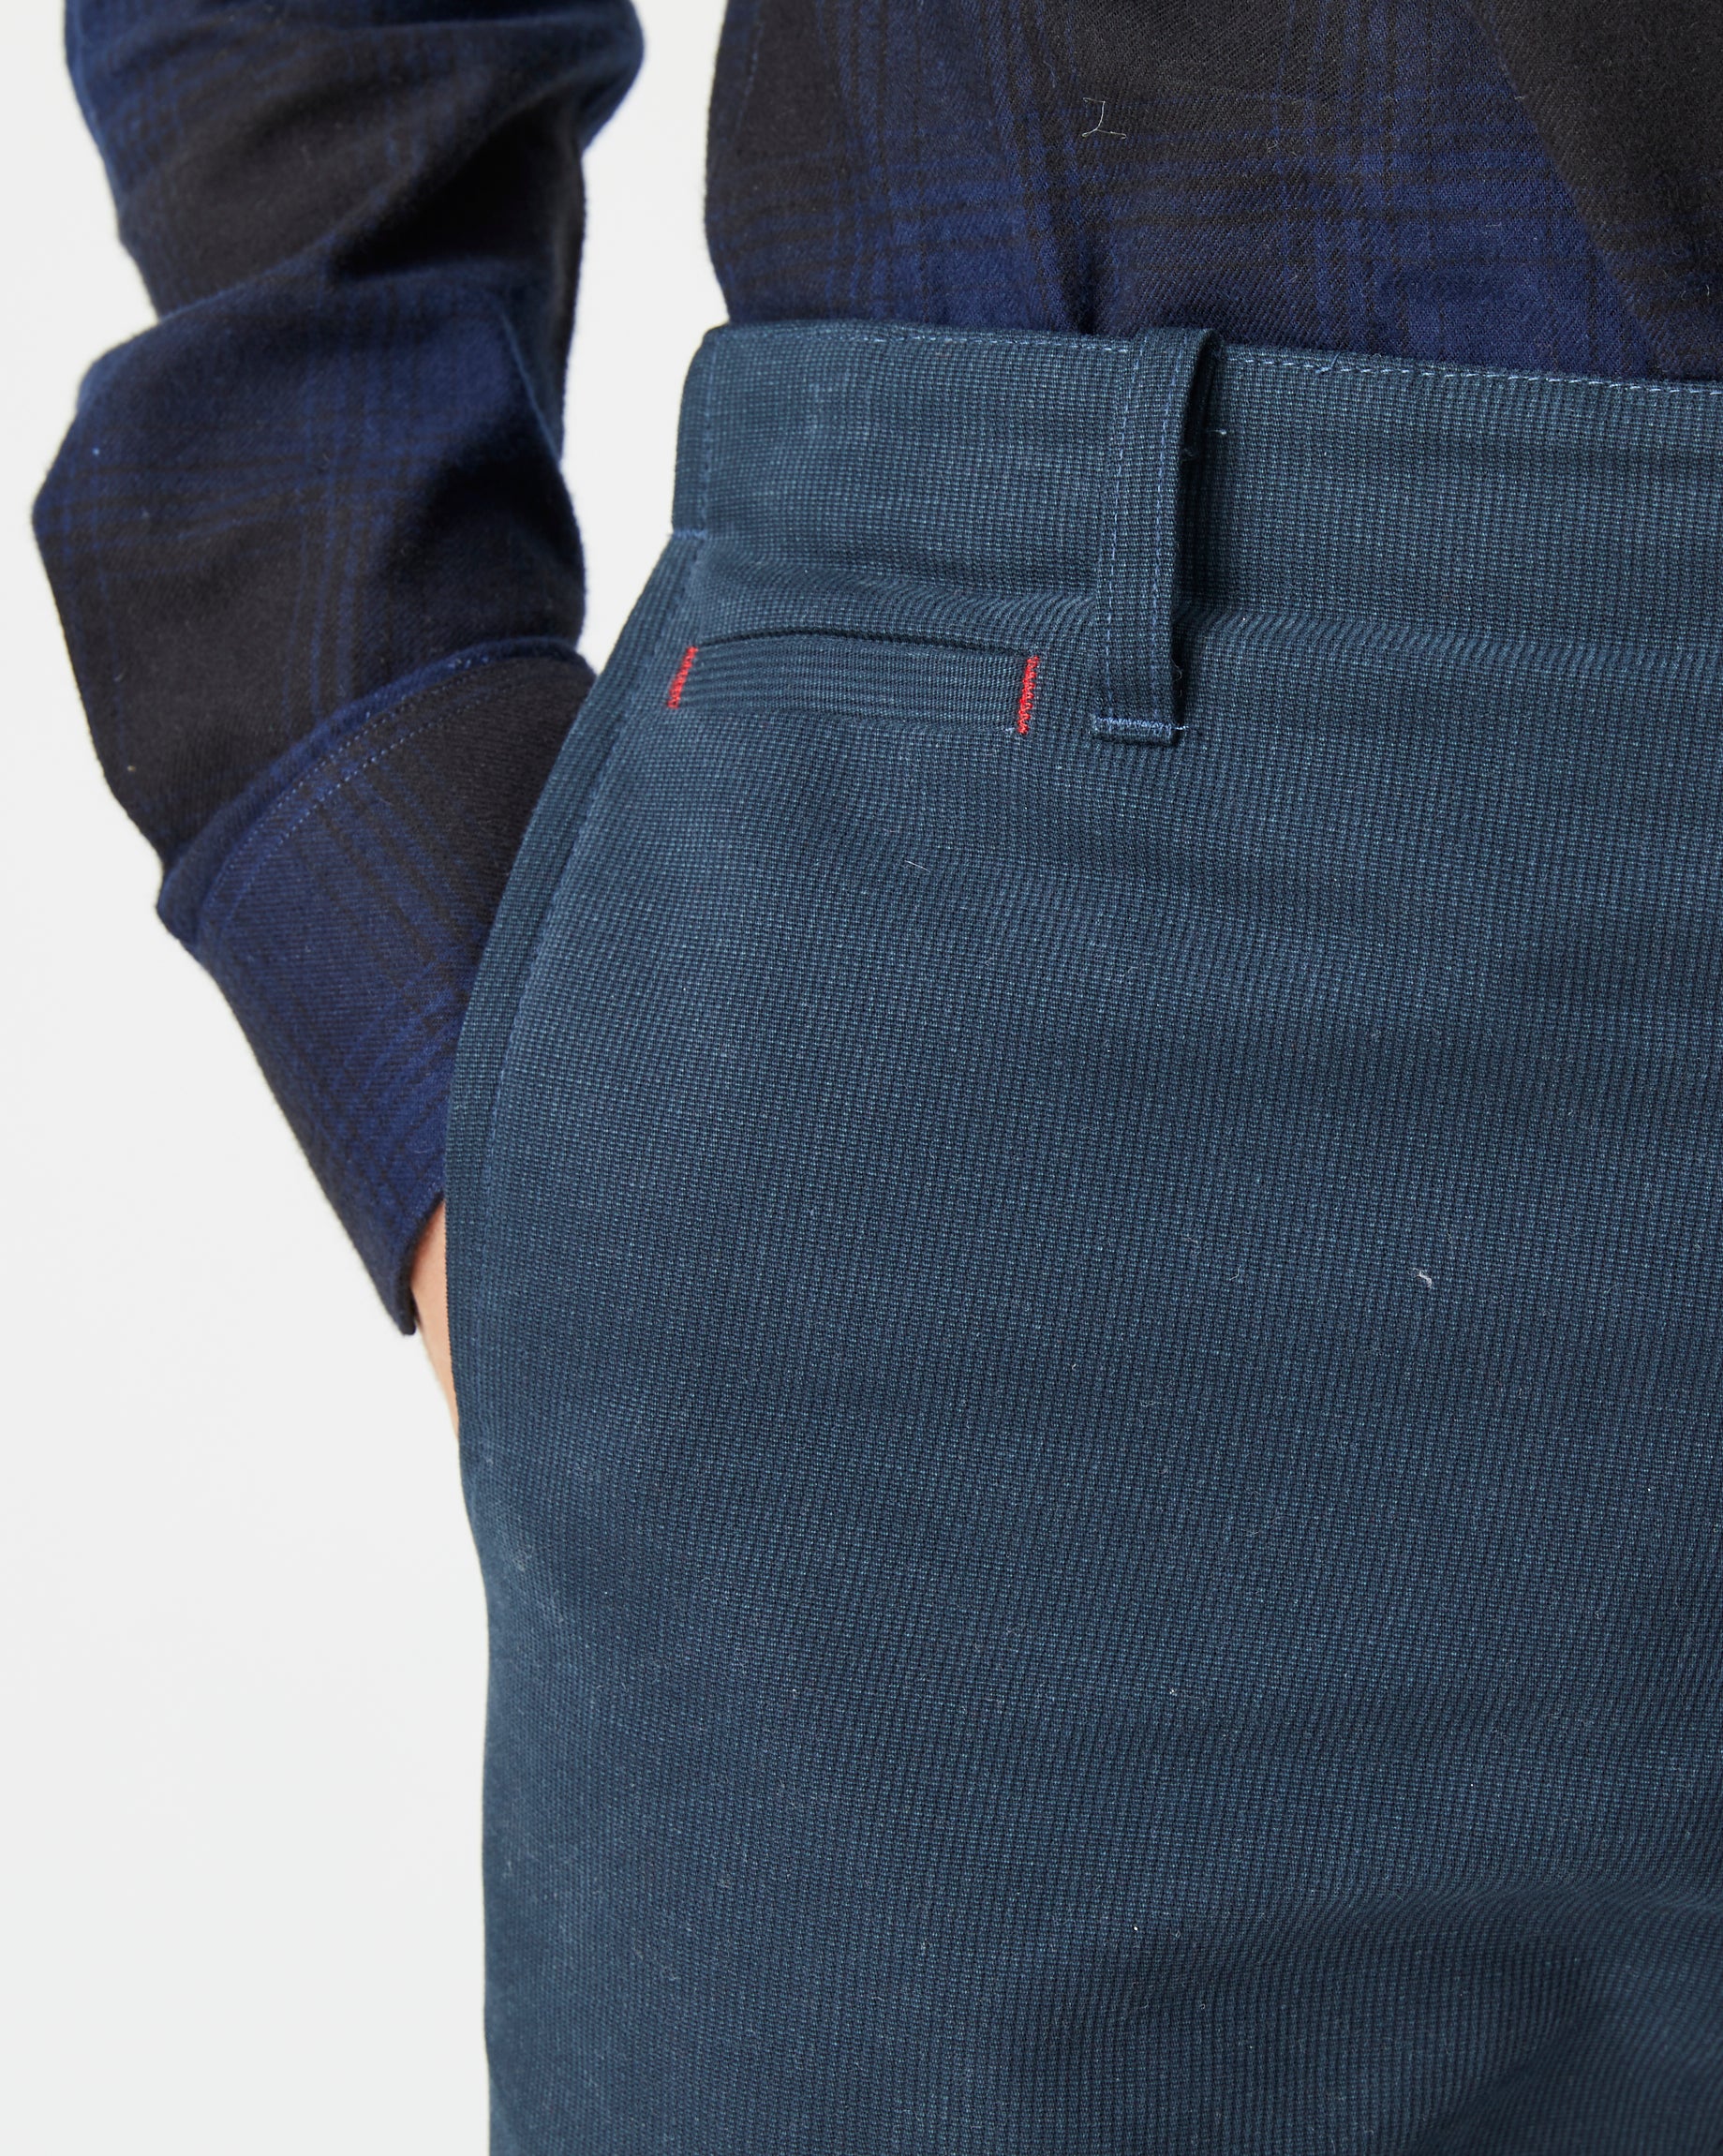 Signature Trouser | Navy Bedford Cord